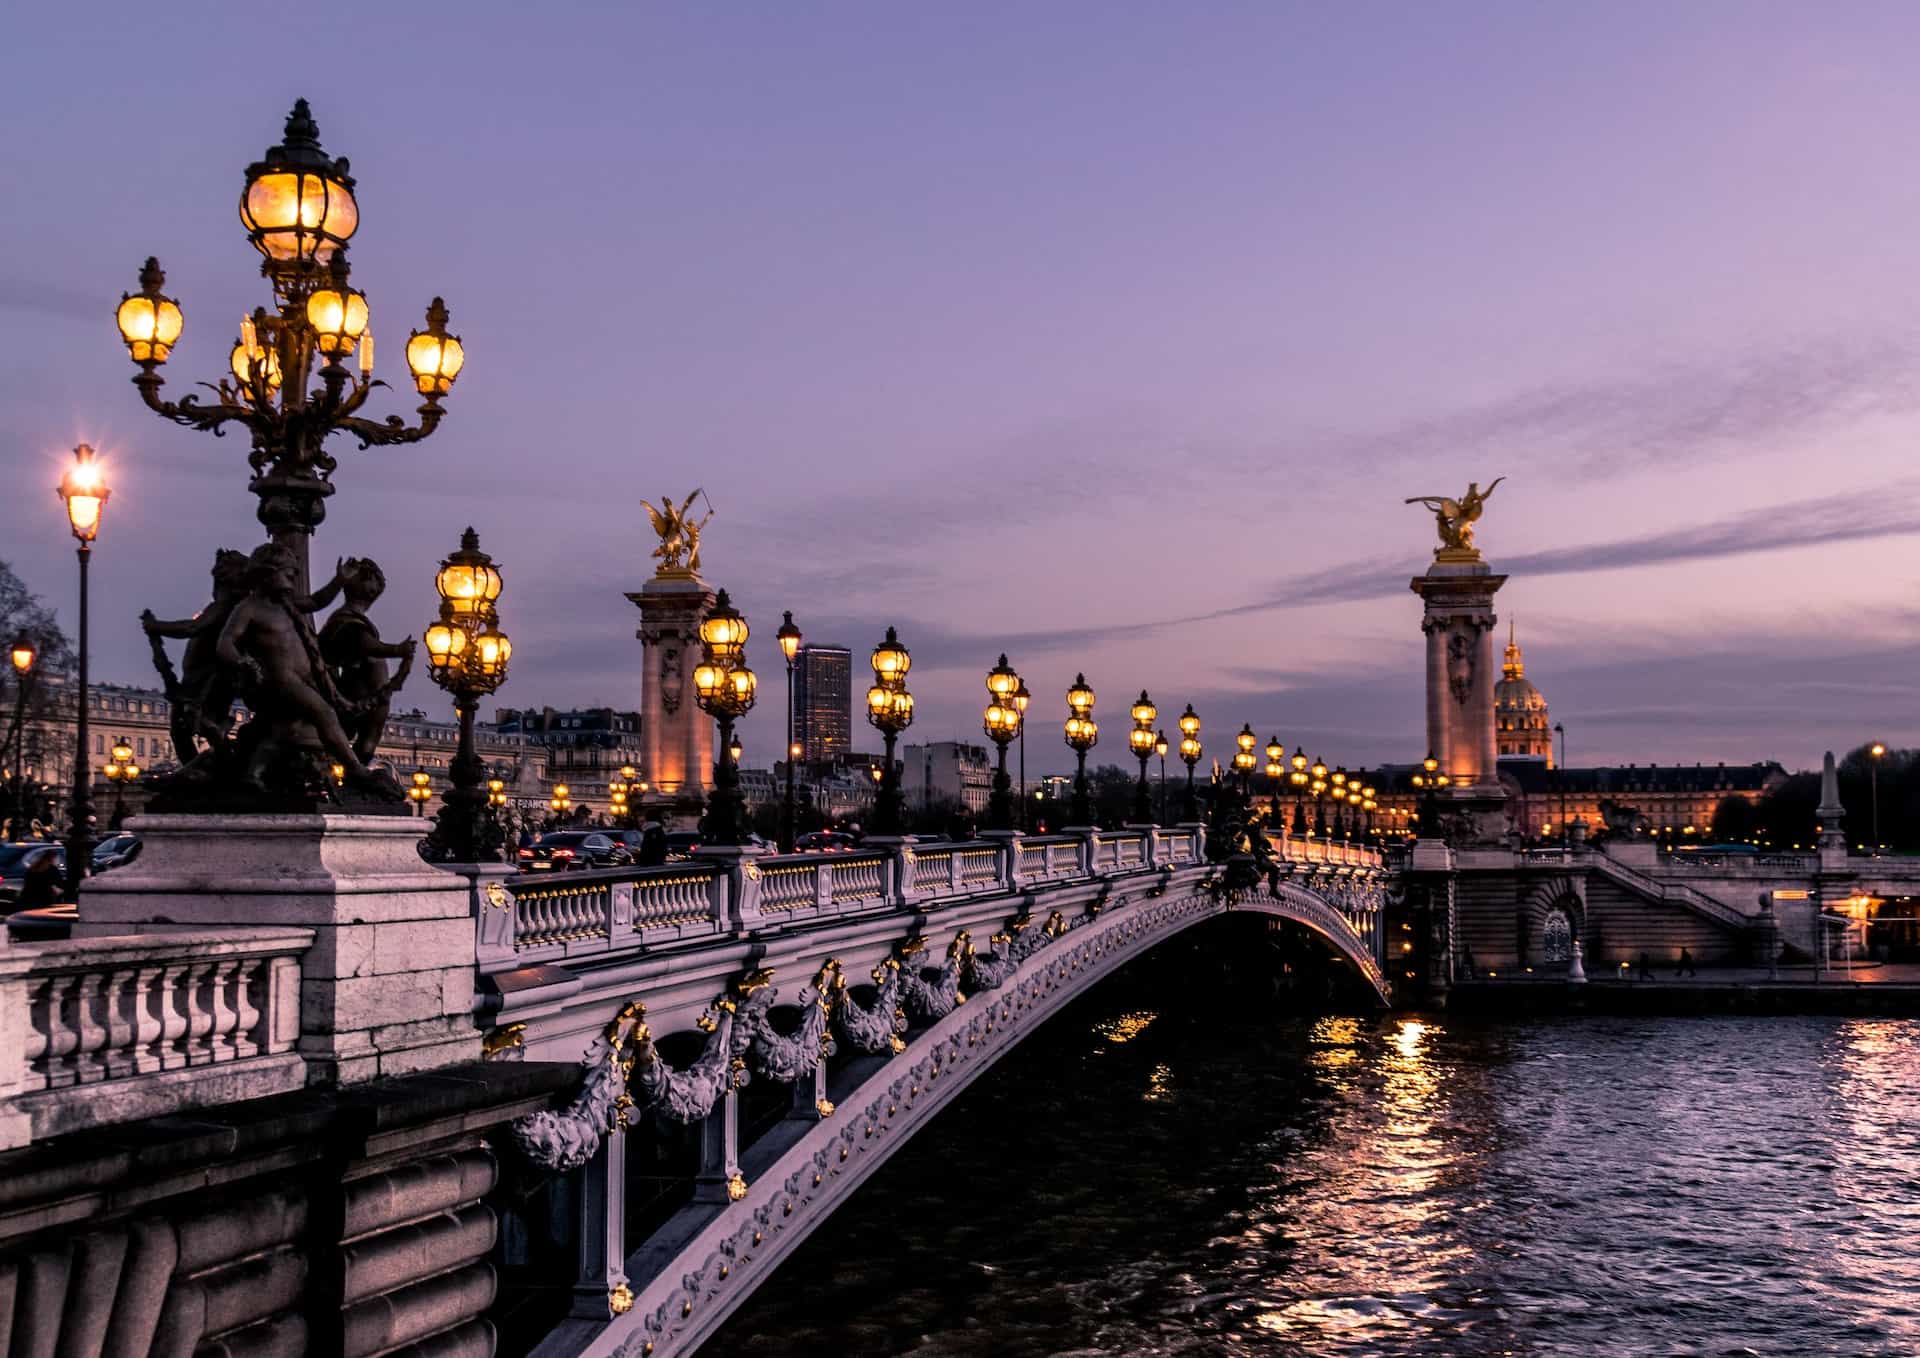 A Parisian bridge with lit lamp posts over water.